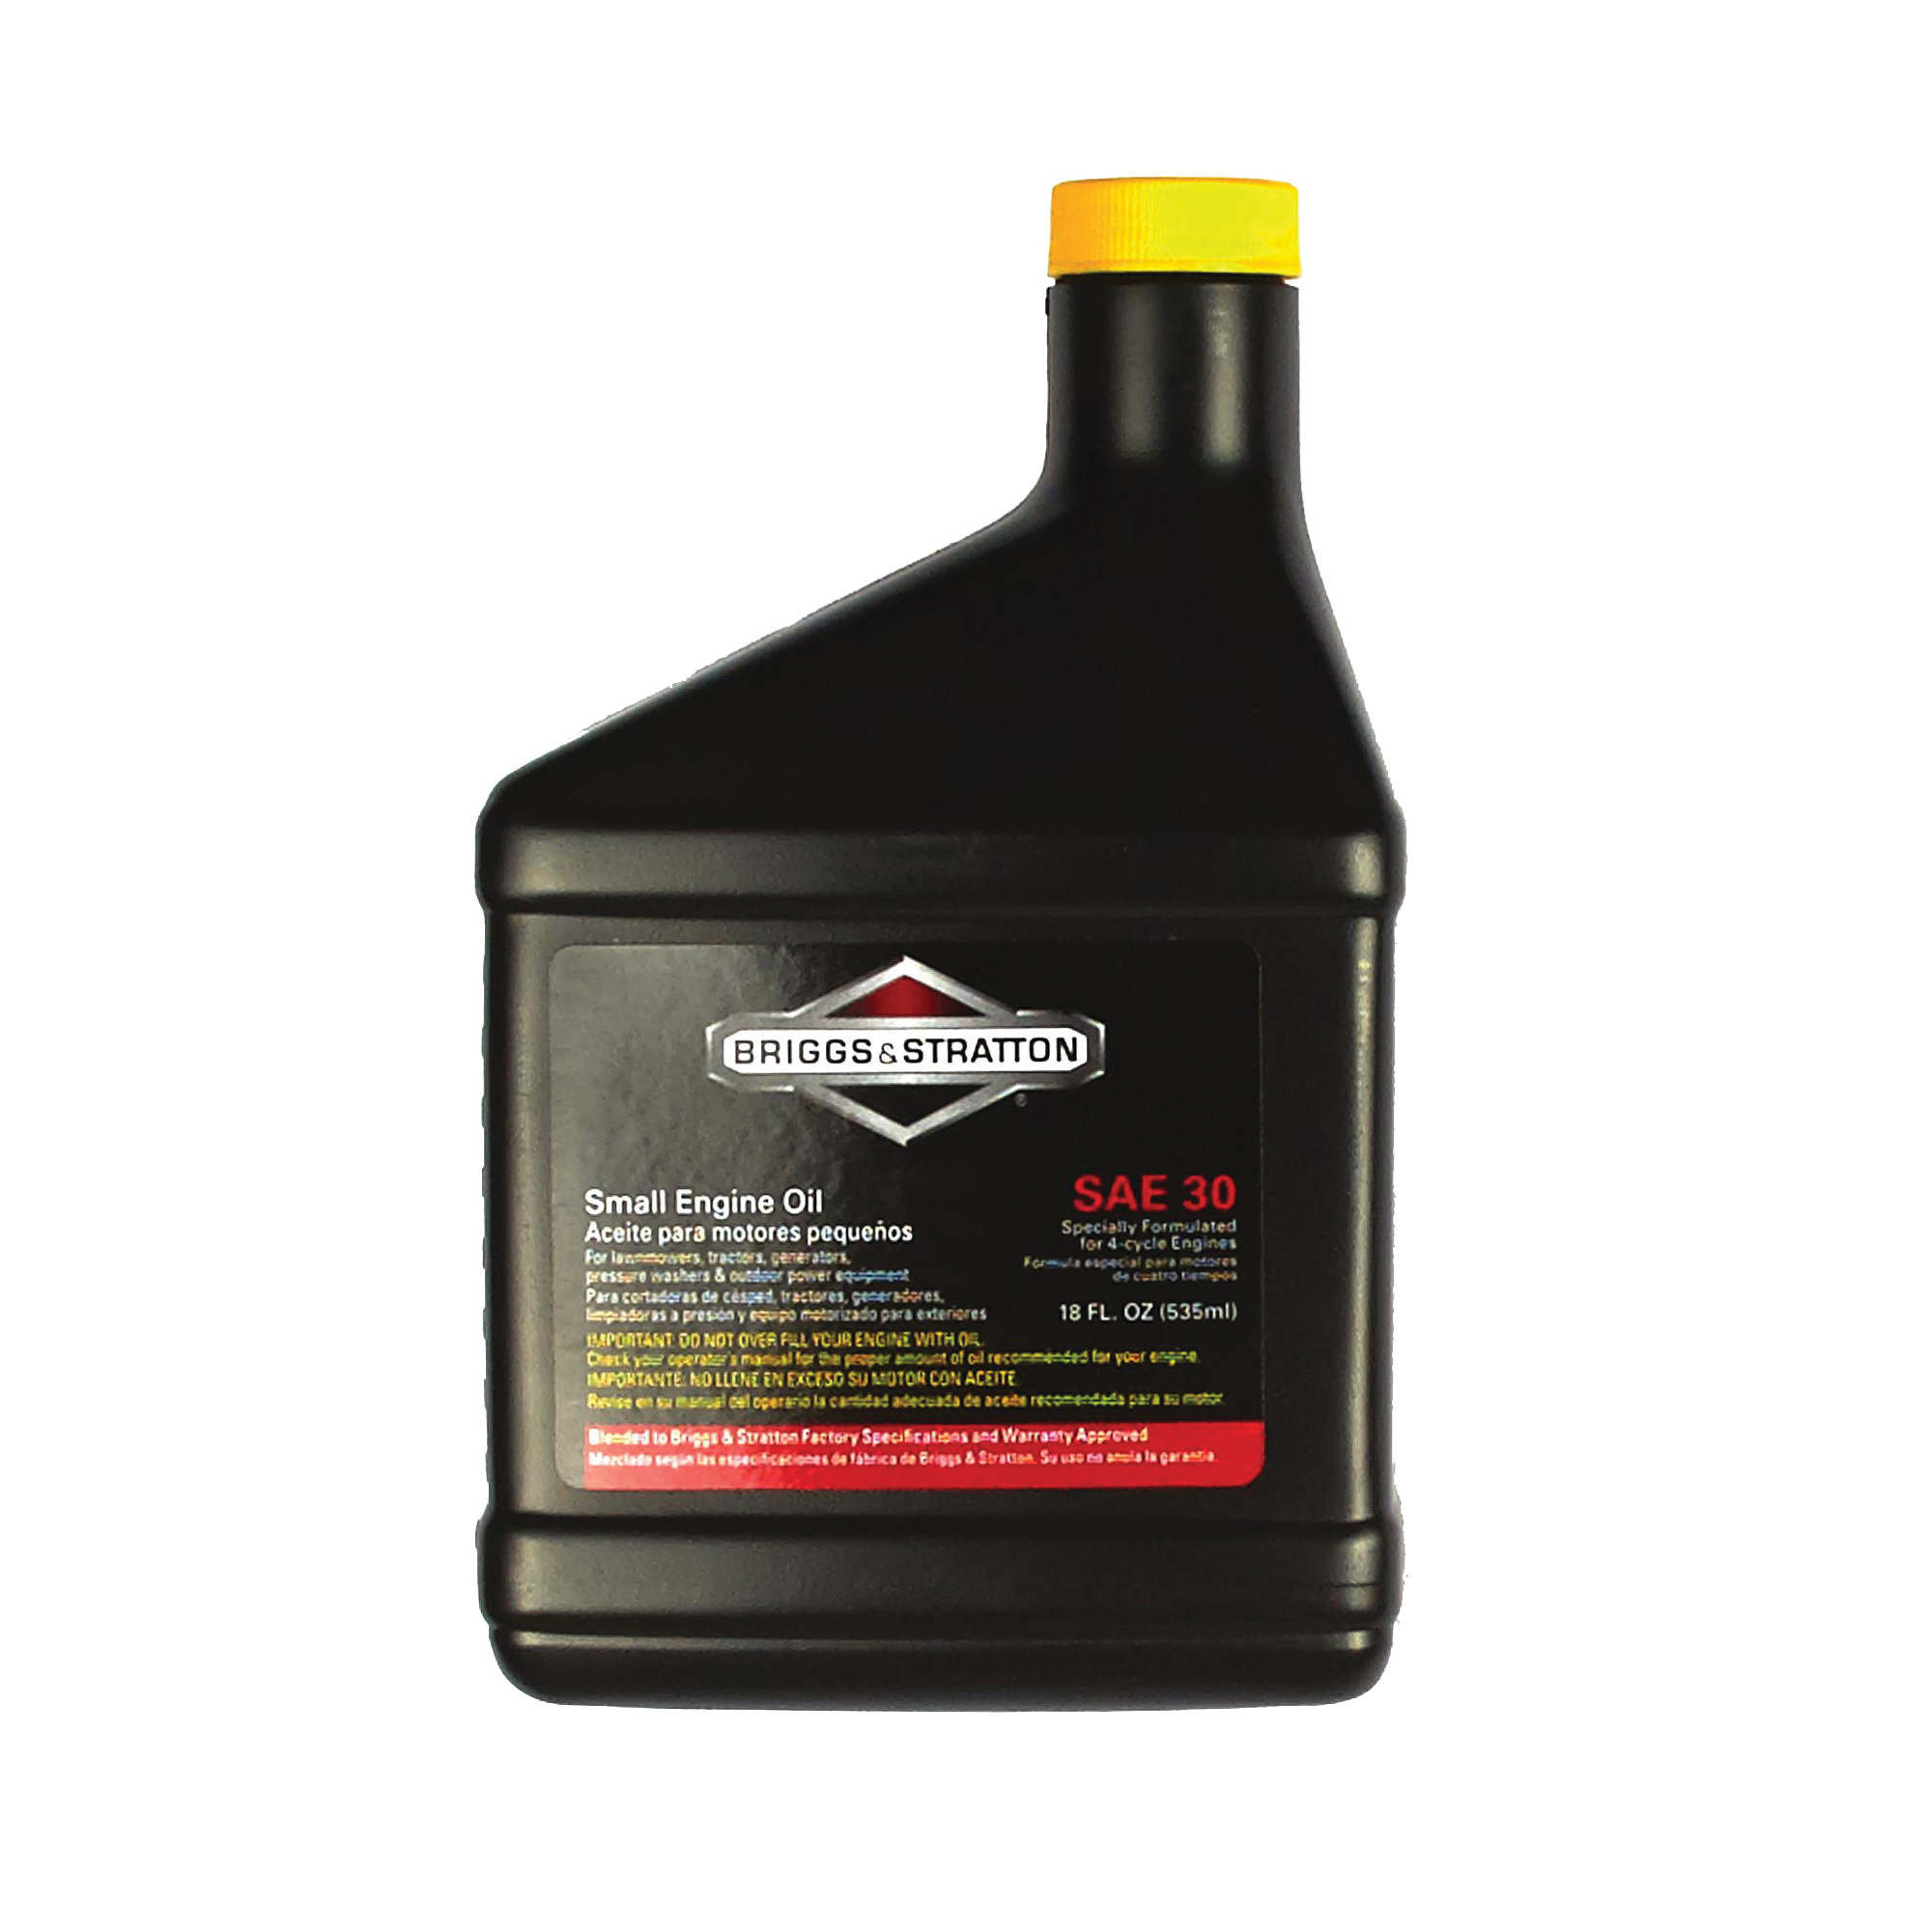 Oil, Lubricants & Additives